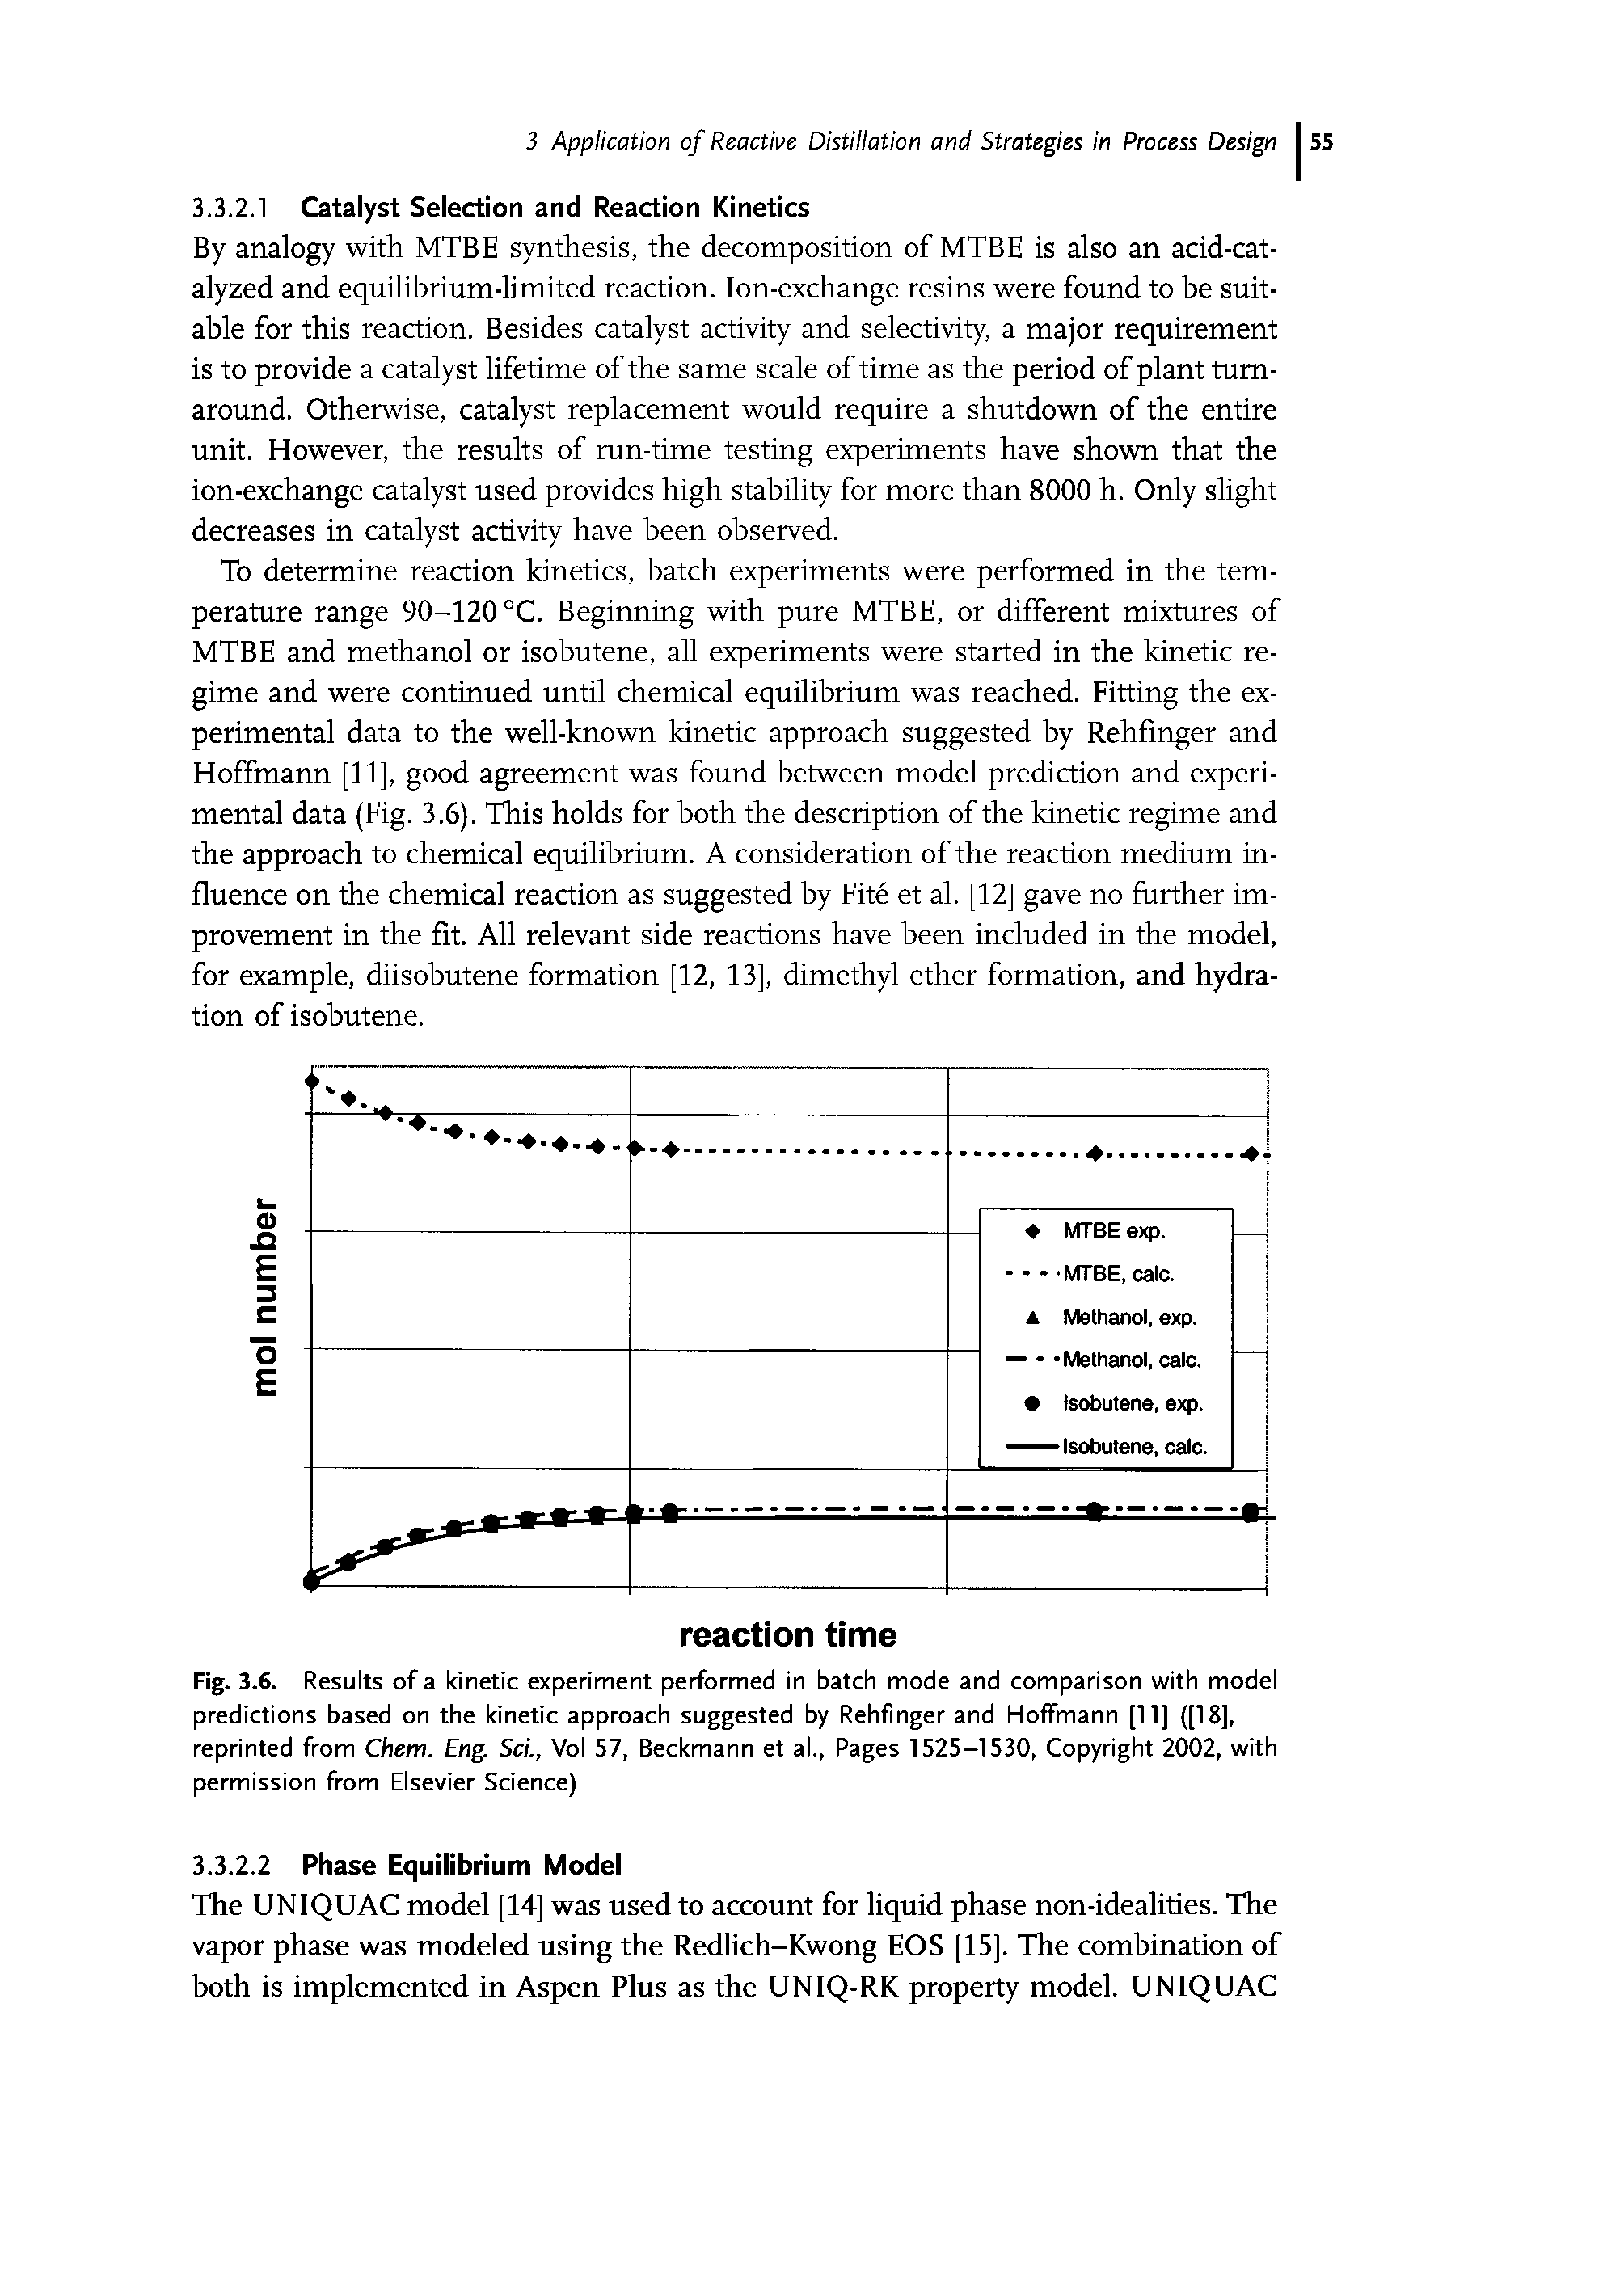 Fig. 3.6. Results of a kinetic experiment performed in batch mode and comparison with model predictions based on the kinetic approach suggested by Rehfinger and Hoffmann [11] ([18], reprinted from Chem. Eng Sci., Vol 57, Beckmann et al., Pages 1525-1530, Copyright 2002, with permission from Elsevier Science)...